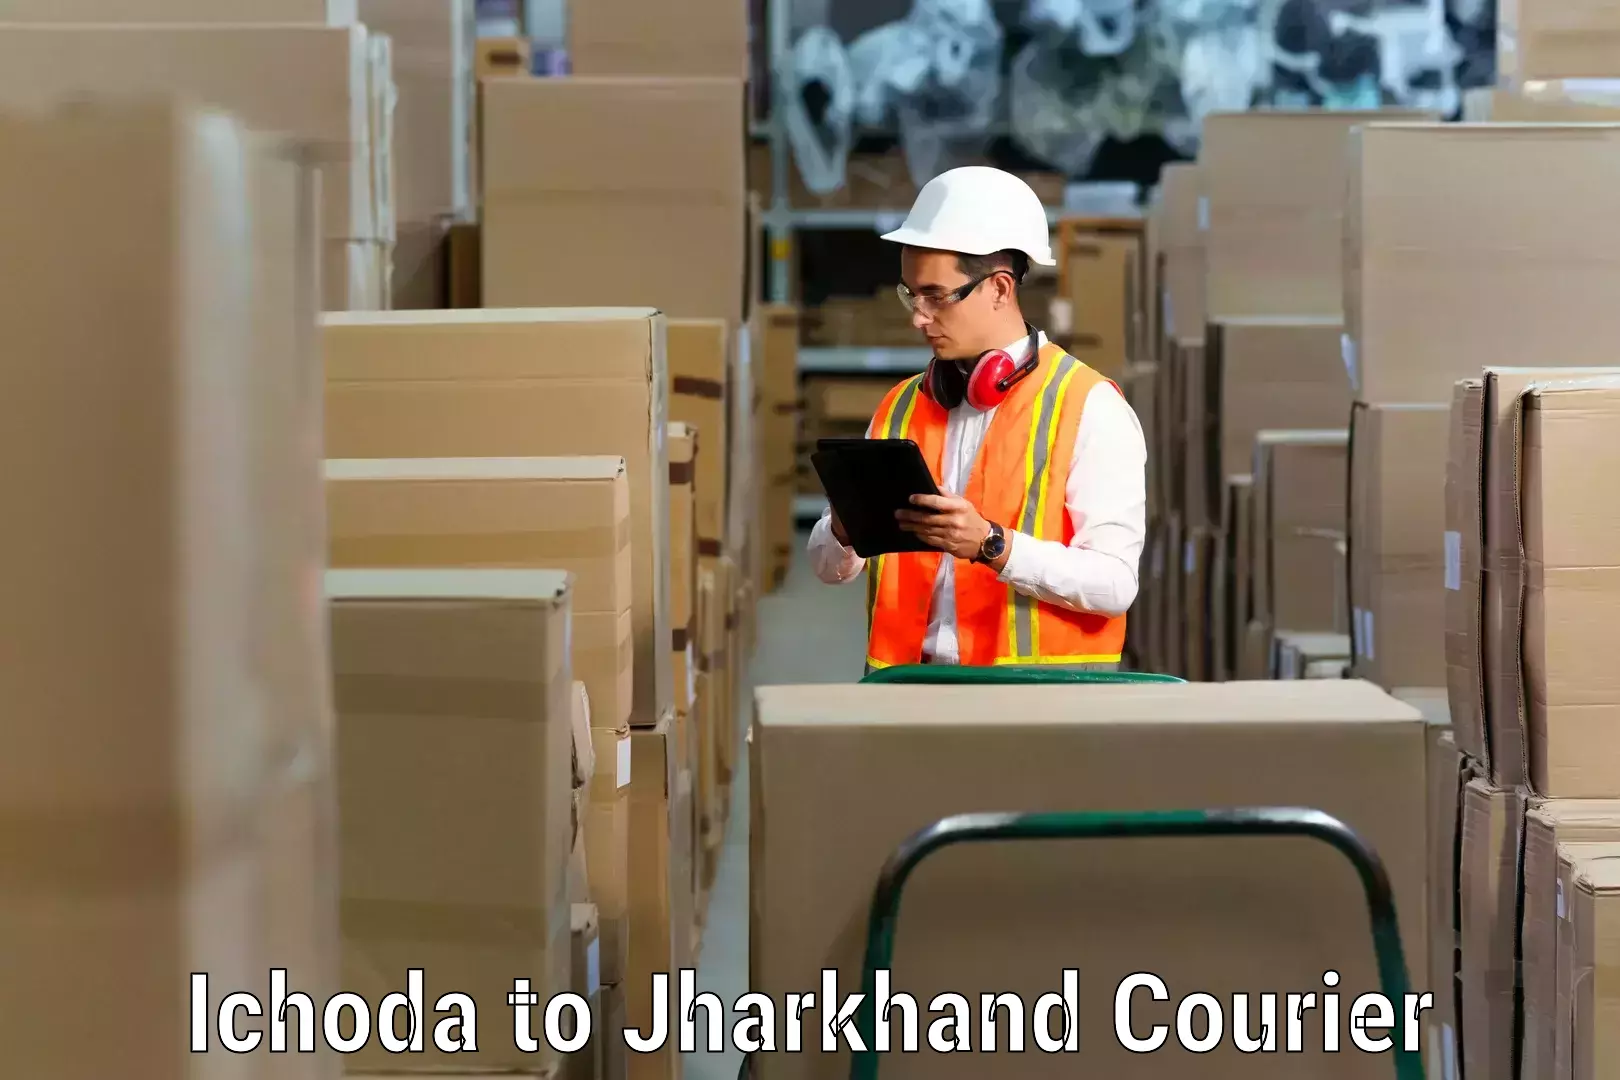 Furniture moving specialists Ichoda to Jharkhand